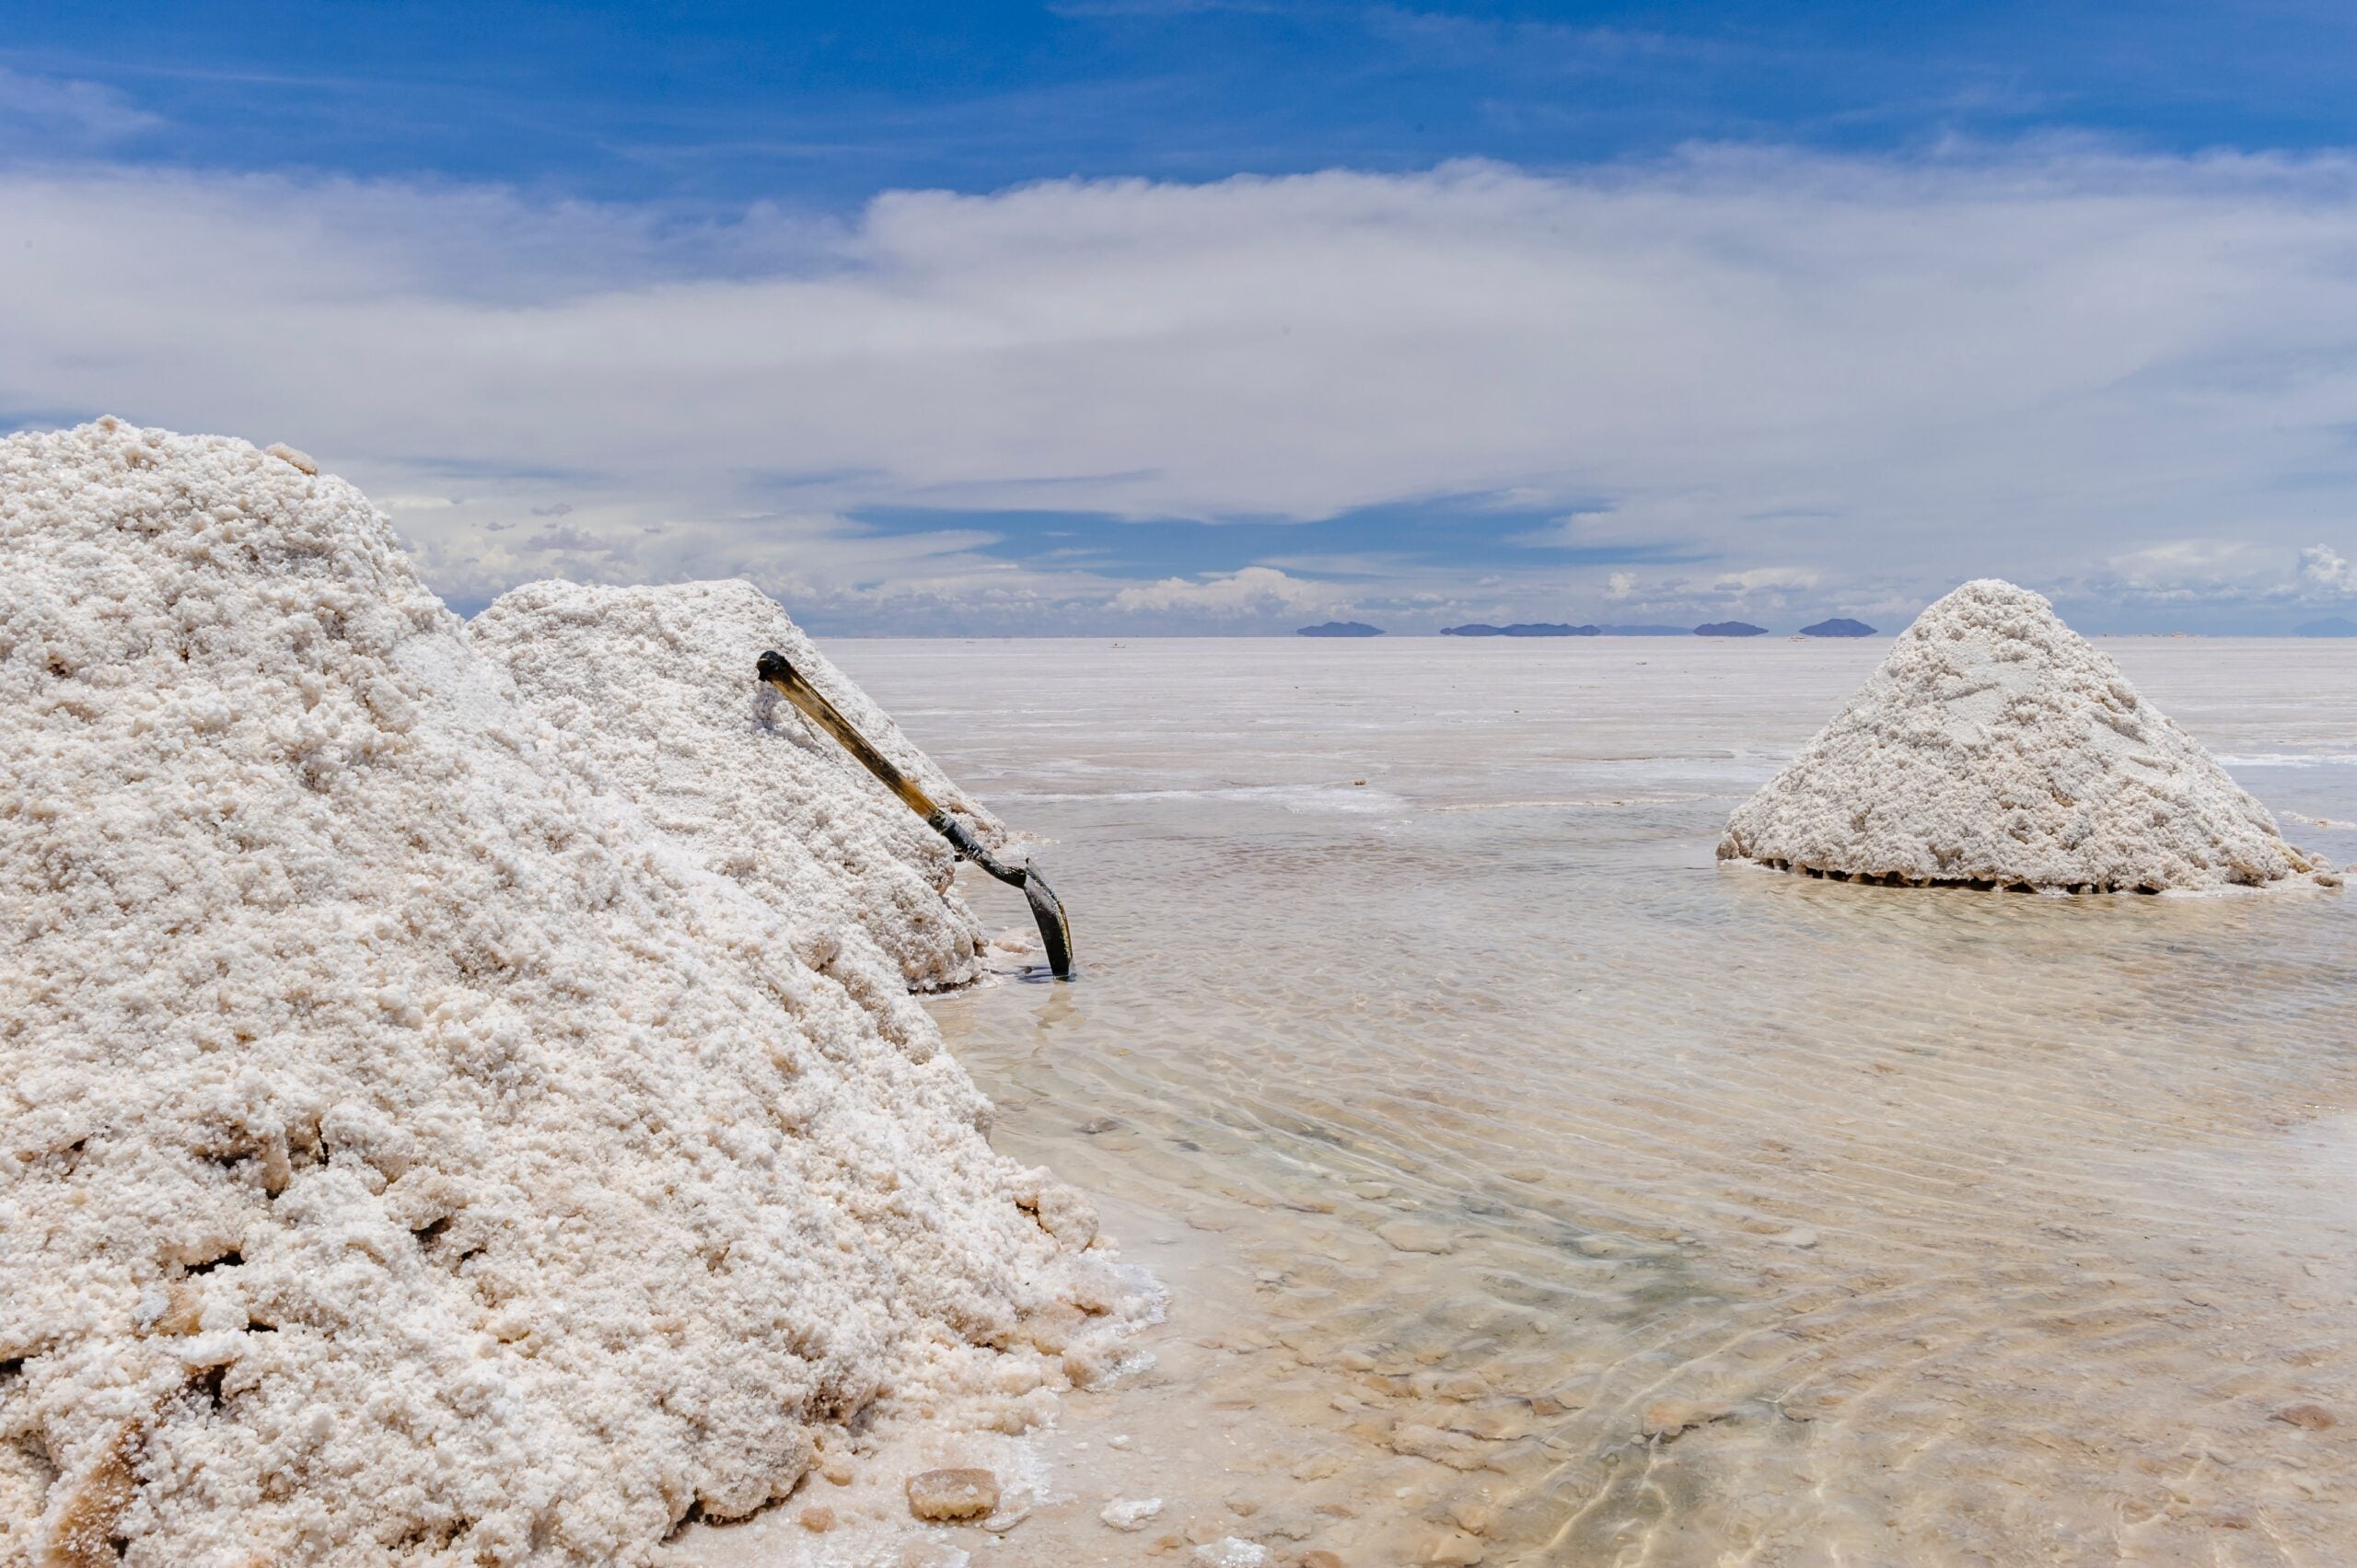 New paper details profitable lithium extraction from seawater